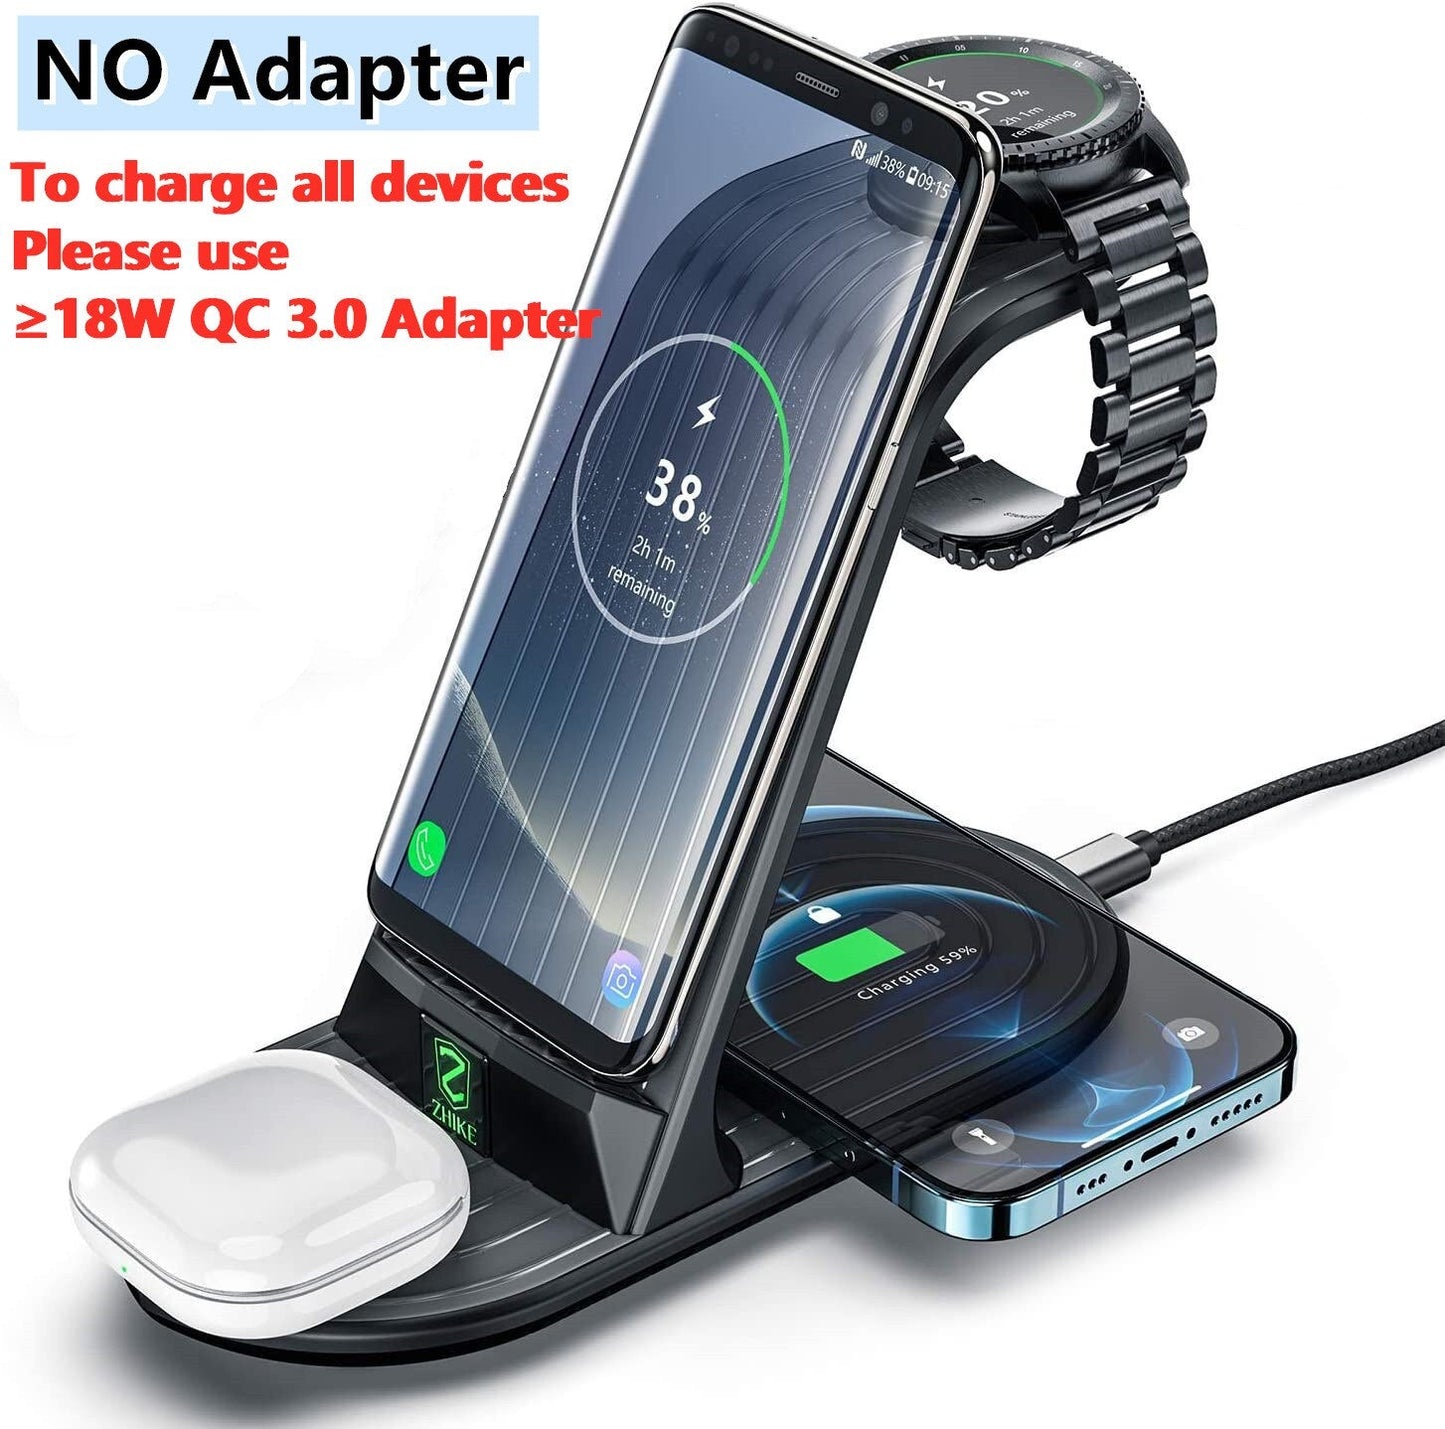 Station de charge rapide 4 en 1 pour Samsung Galaxy Watch 3, Gear, Buds, Note 20, S21, iPhone 12, 11 Pro Max, AirPods